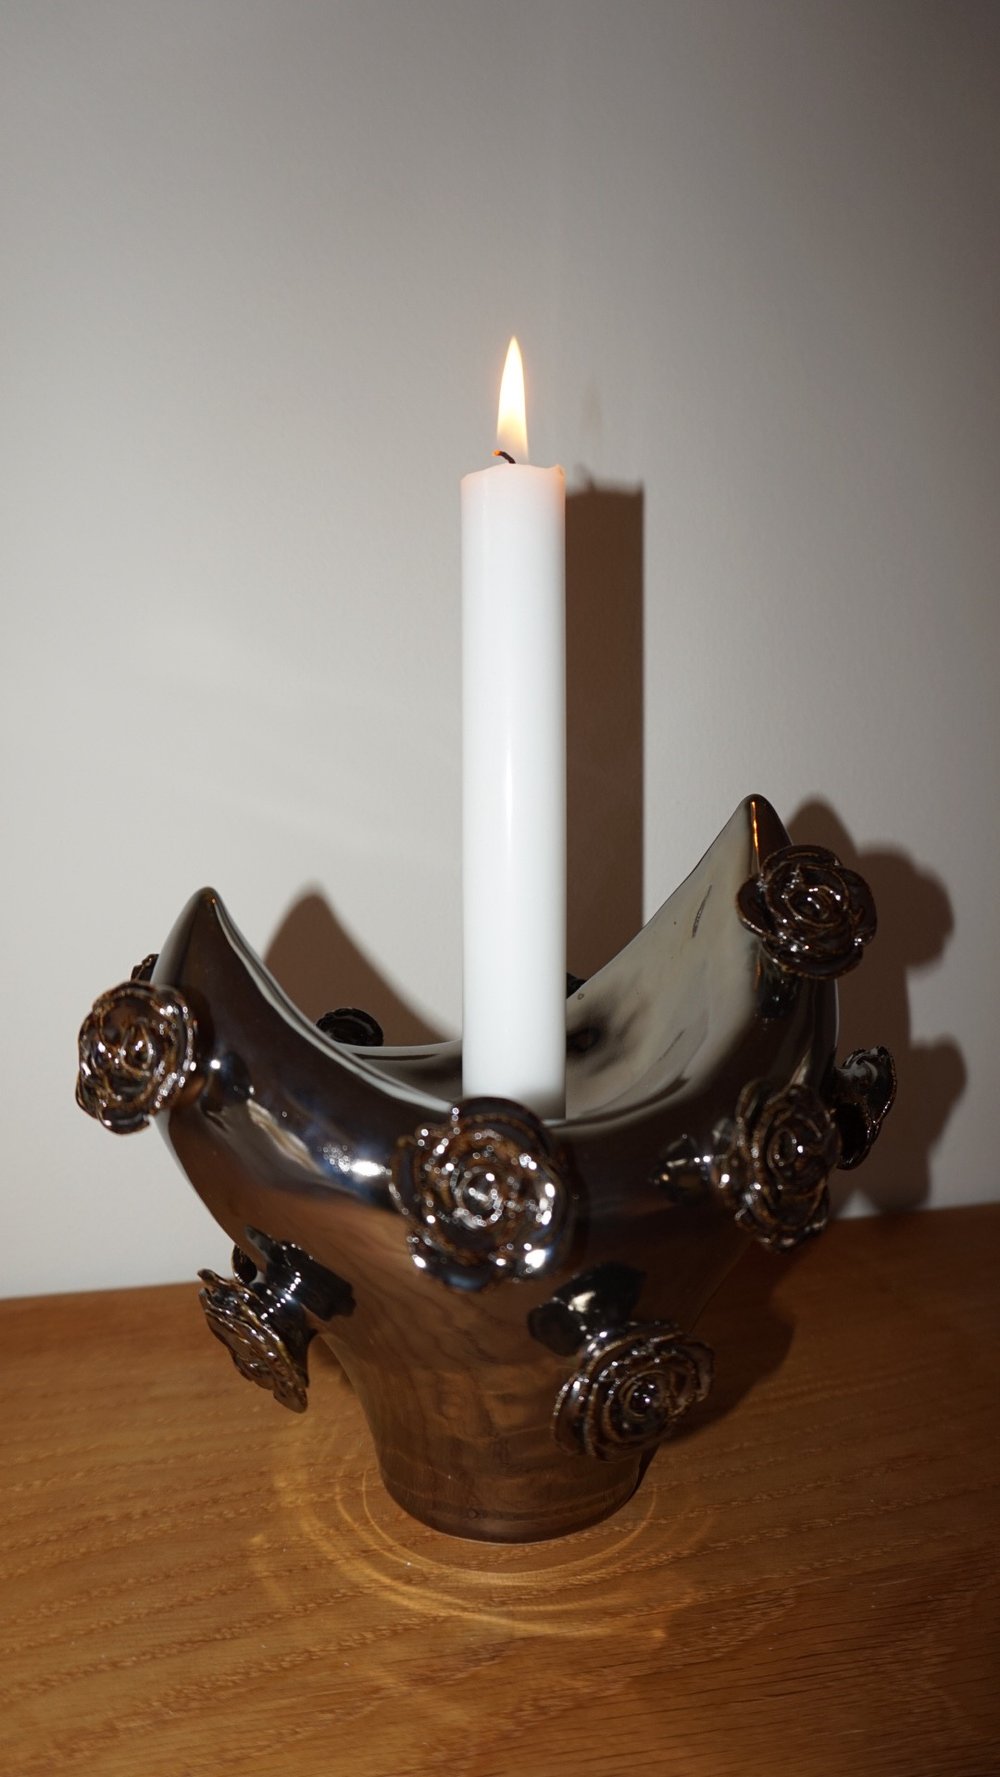 Image of "The evil moon candle holder", metallic roses